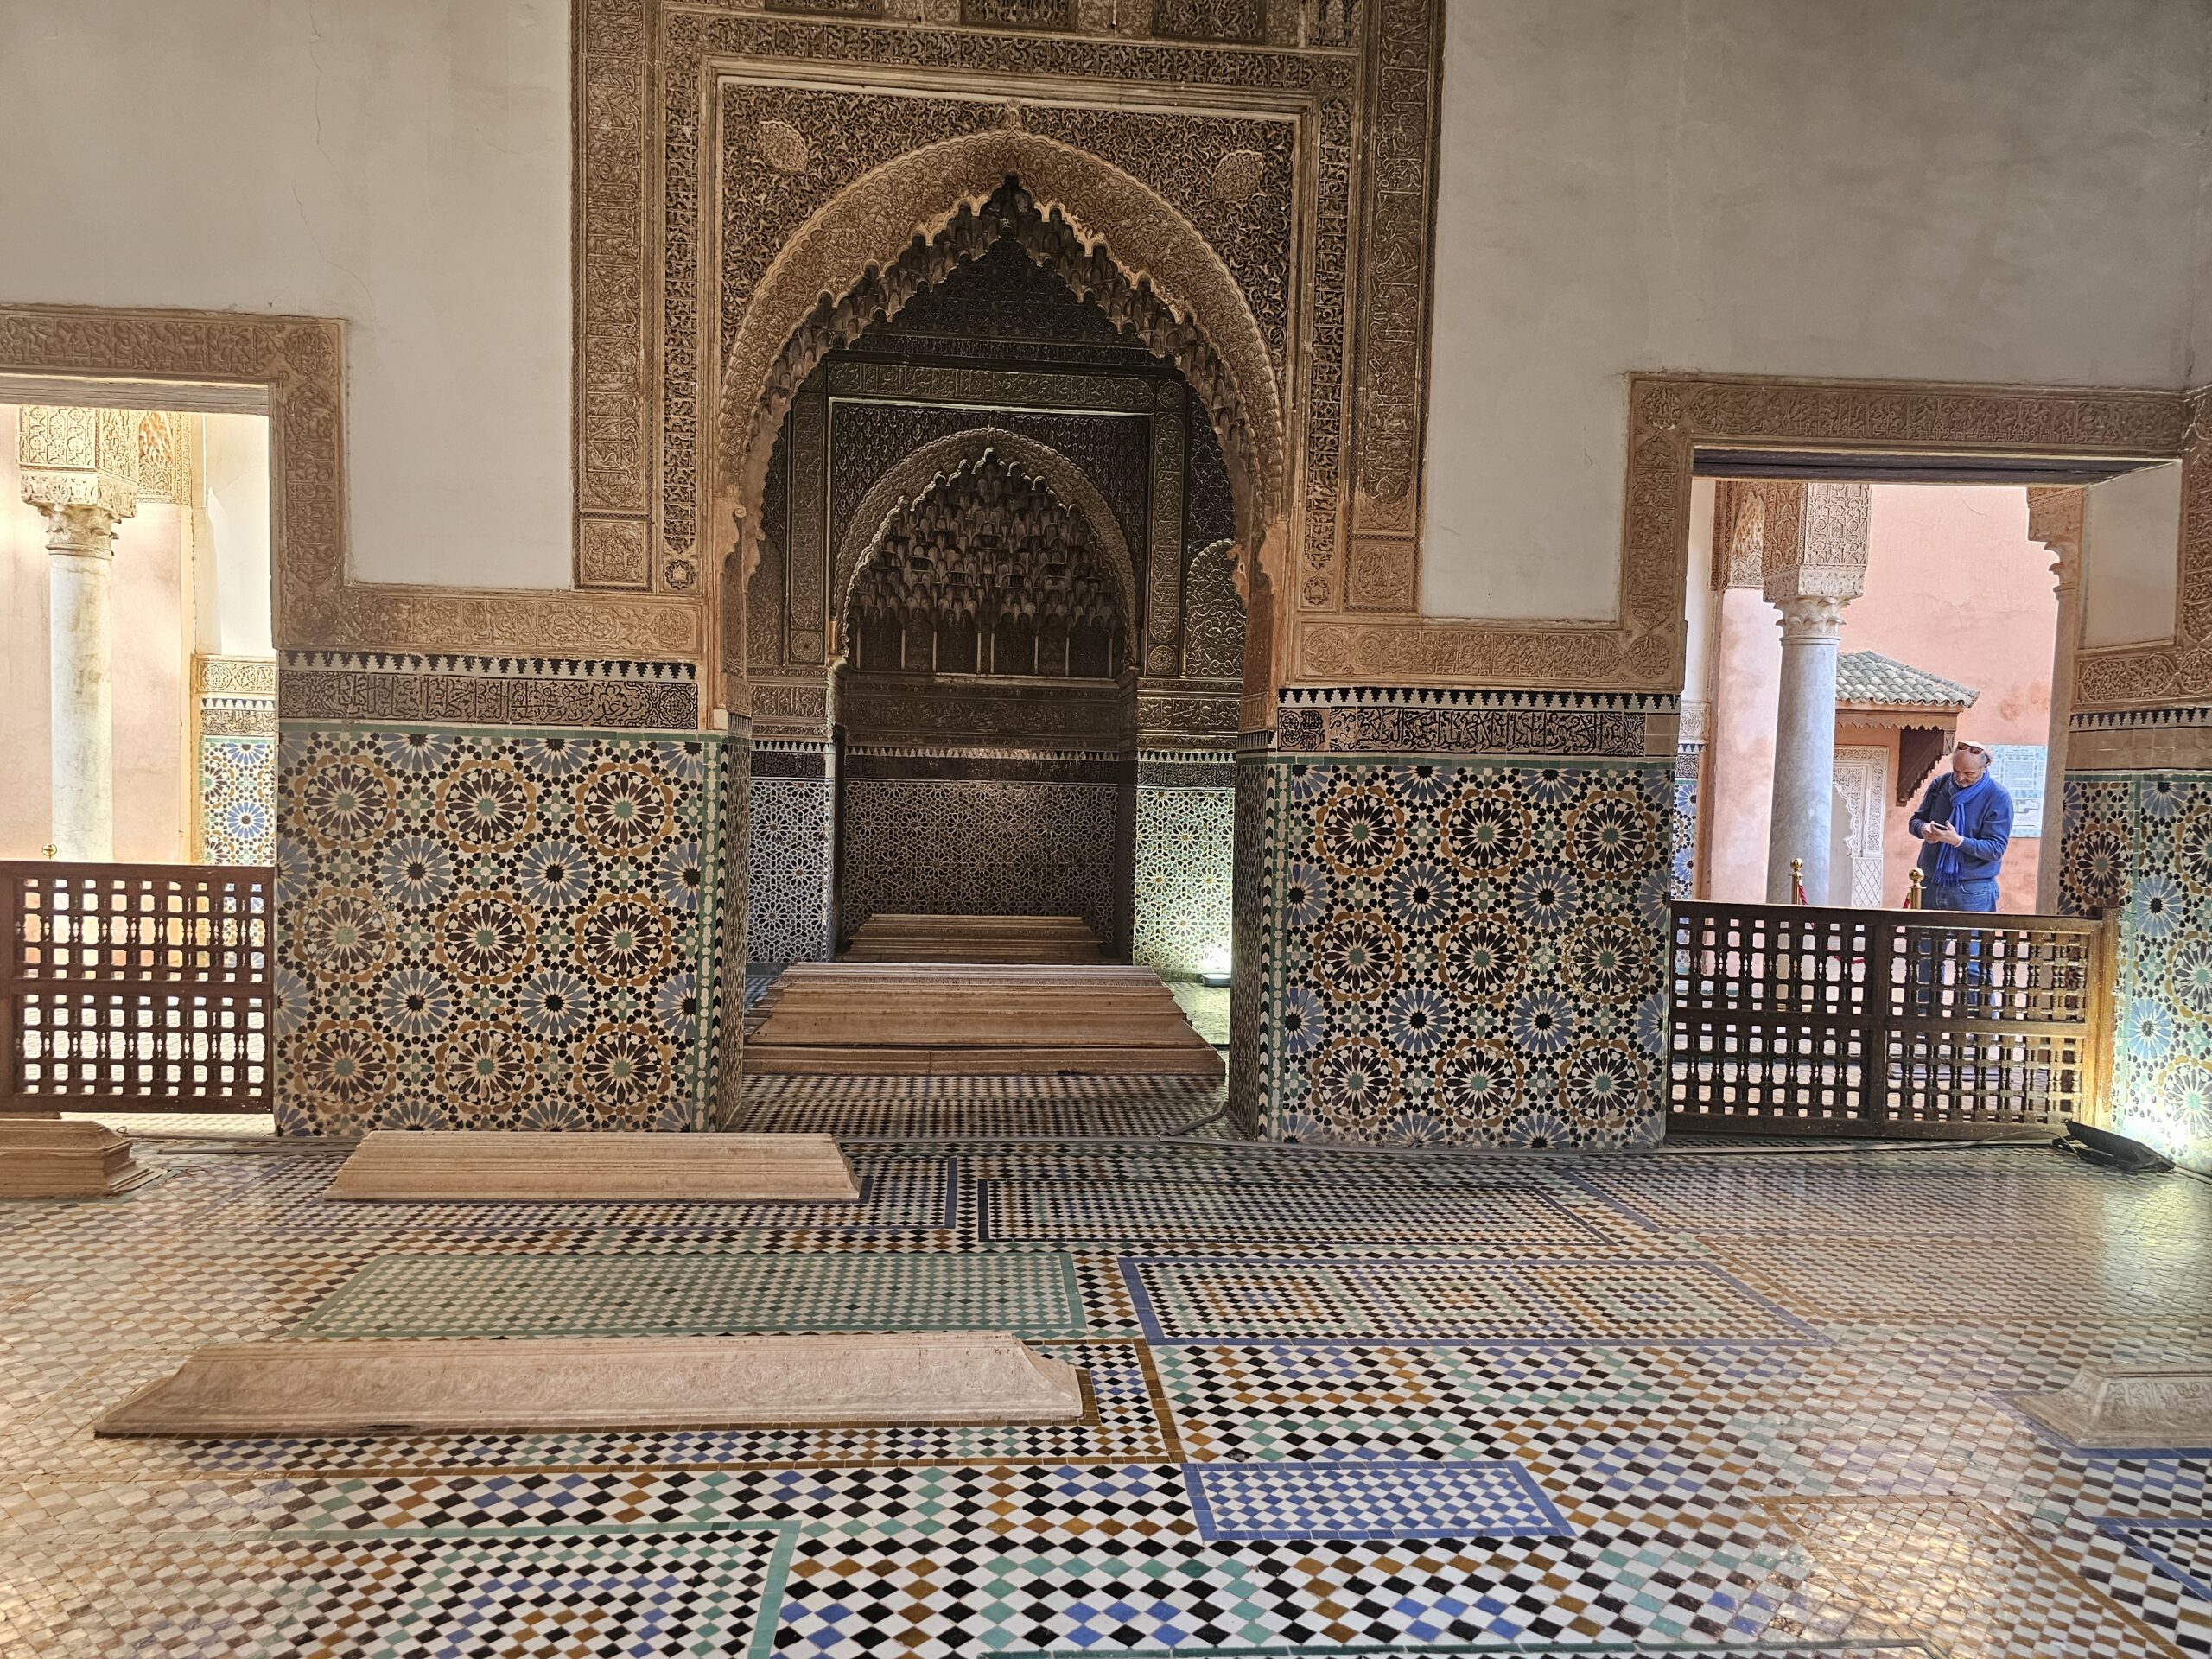 Graves inside Saadian Tombs, Marrakesh. This is the room of three niches. Image by 360onhistory.com